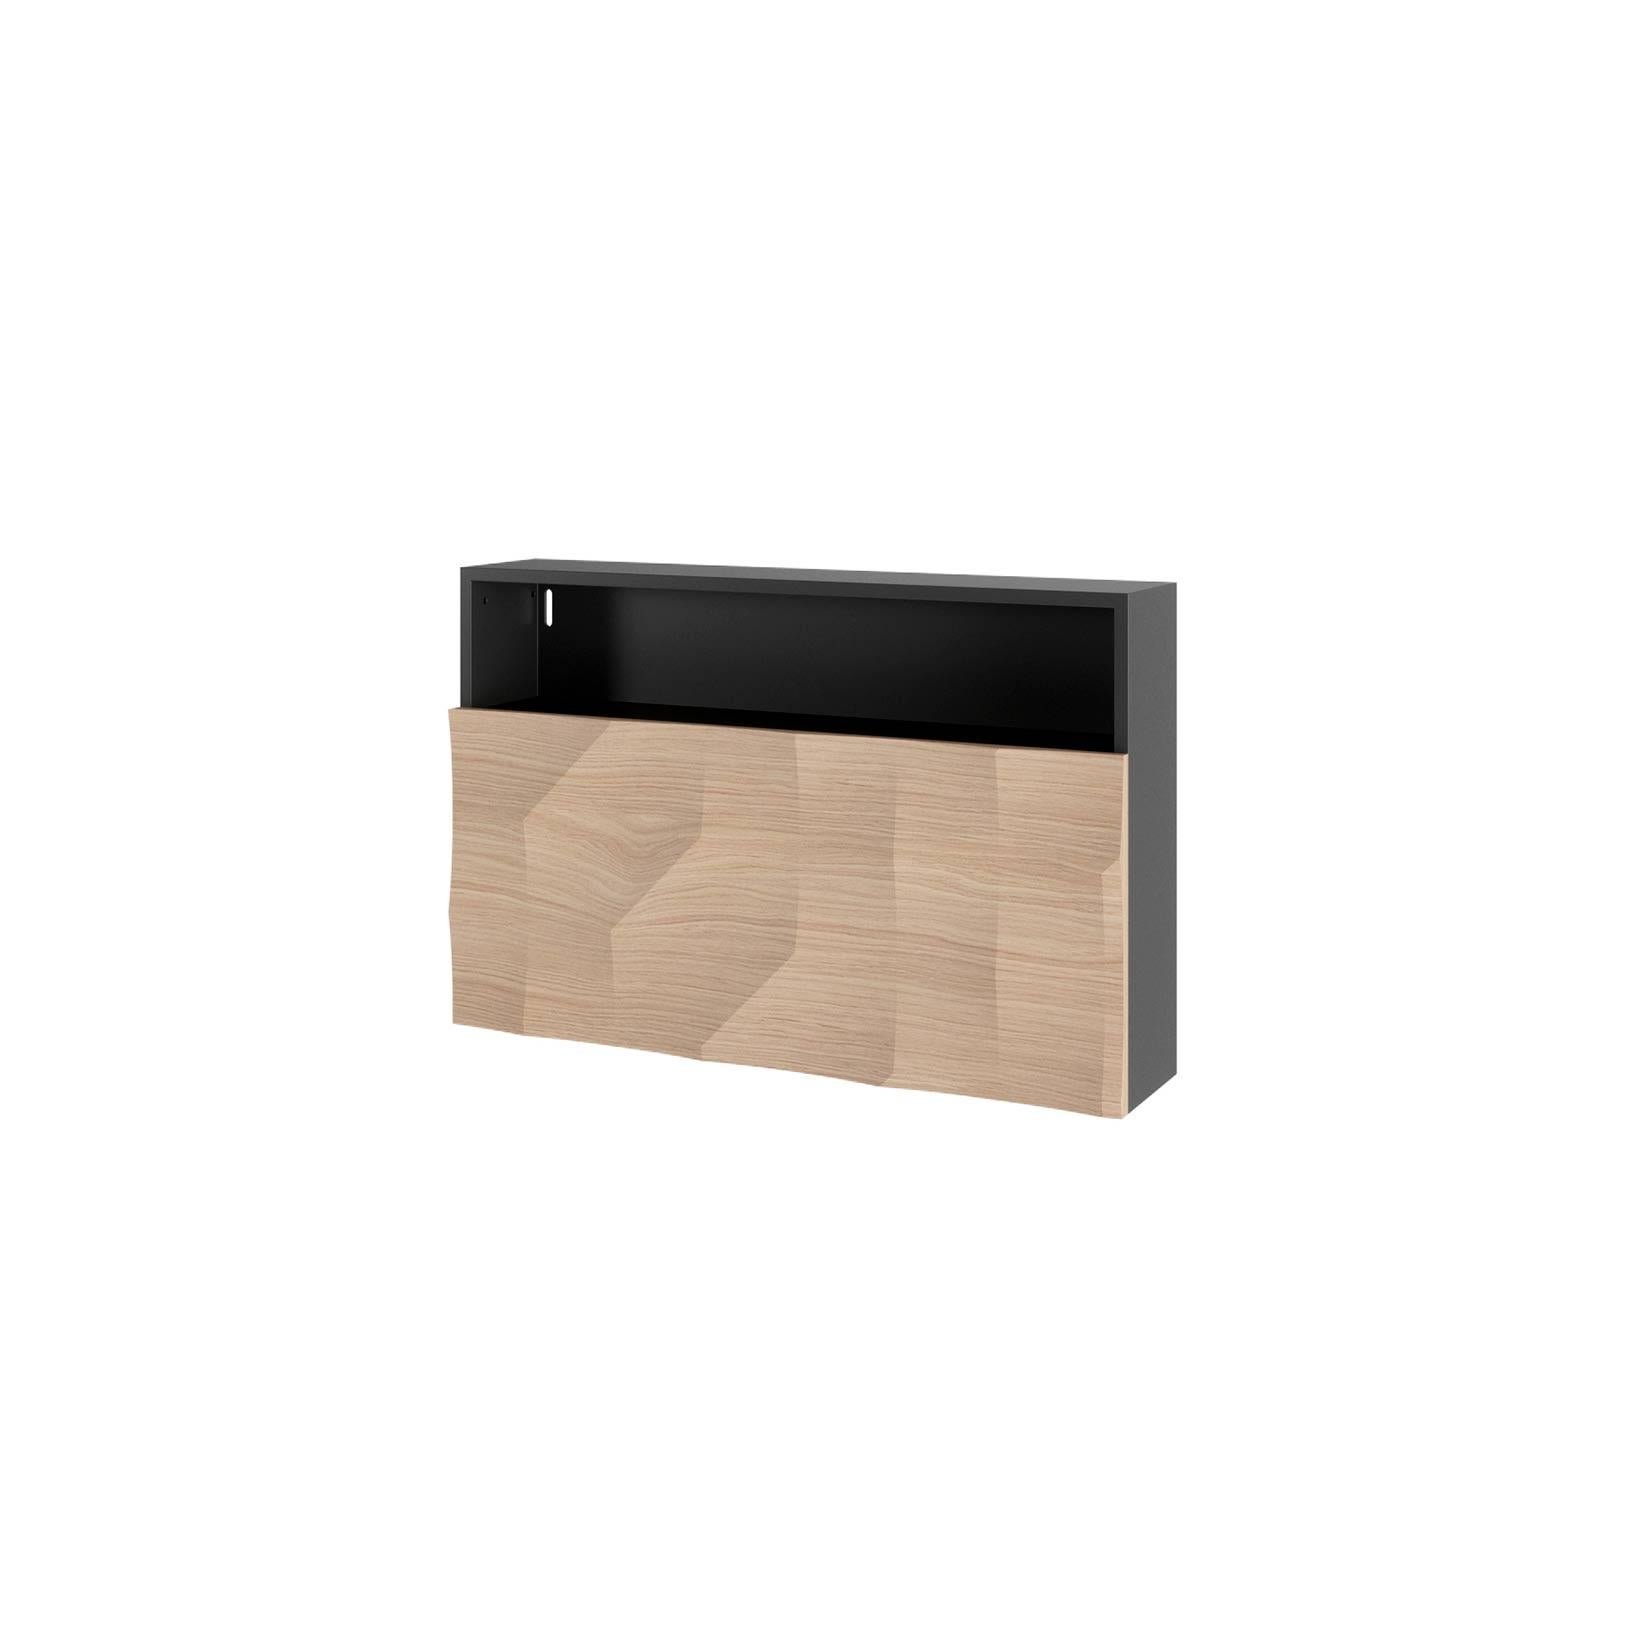 *Collection not sold in France, exclusive to Mobilier de France.*

Monte Carlo Wall Desk.

The MonteCarlo collection stands out for its modern and sober look, through the combination of soft and neutral colors that transmit the feeling of comfort,